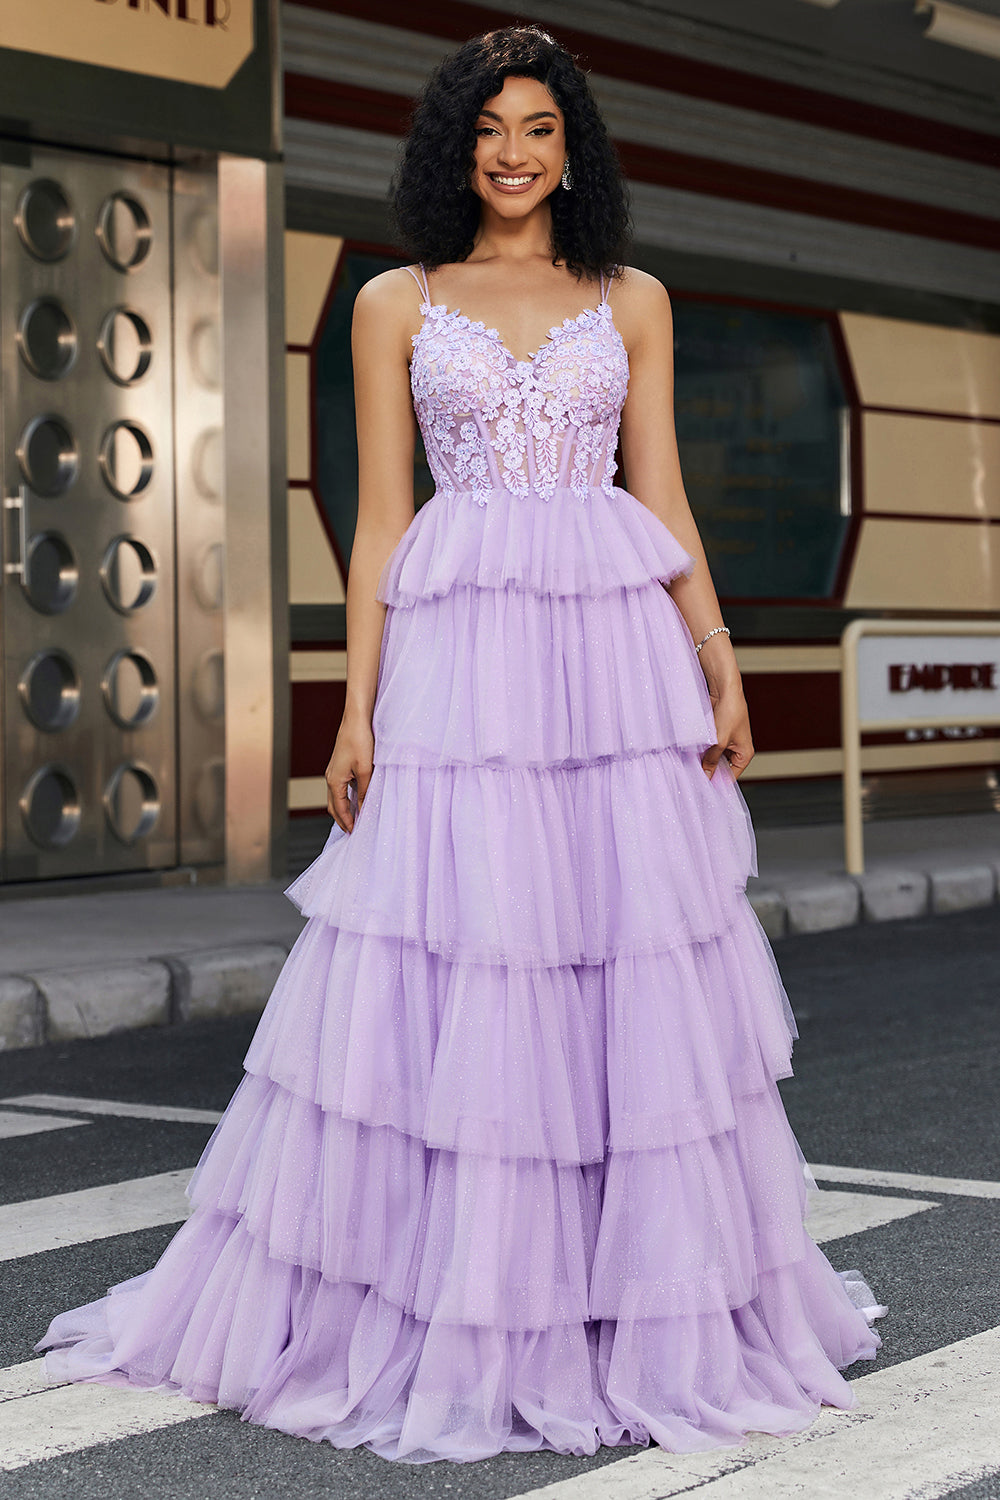 ZAPAKA Women Lilac Tulle Tiered Princess Corset Prom Dress with